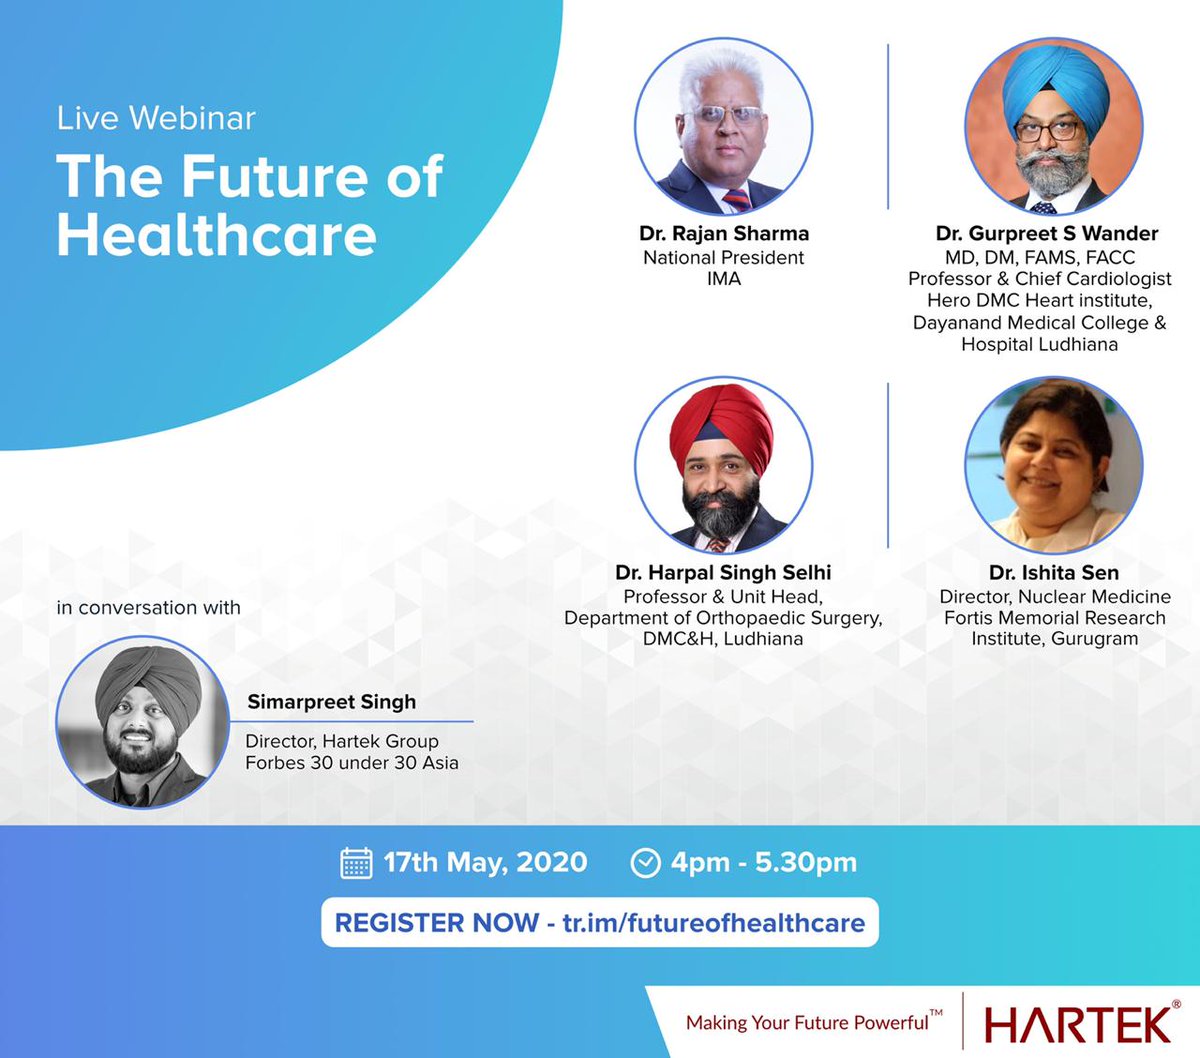 We are back with another phenomenal panel talk for everyone. Master session on THE FUTURE OF HEALTHCARE REGISTER NOW - tr.im/futureofhealth… 17 May ( Sunday) 4:00-5:30pm #hartek #hartekwebinar #livewebinar #health #healthcare #wellbeing #healthy #sustainability